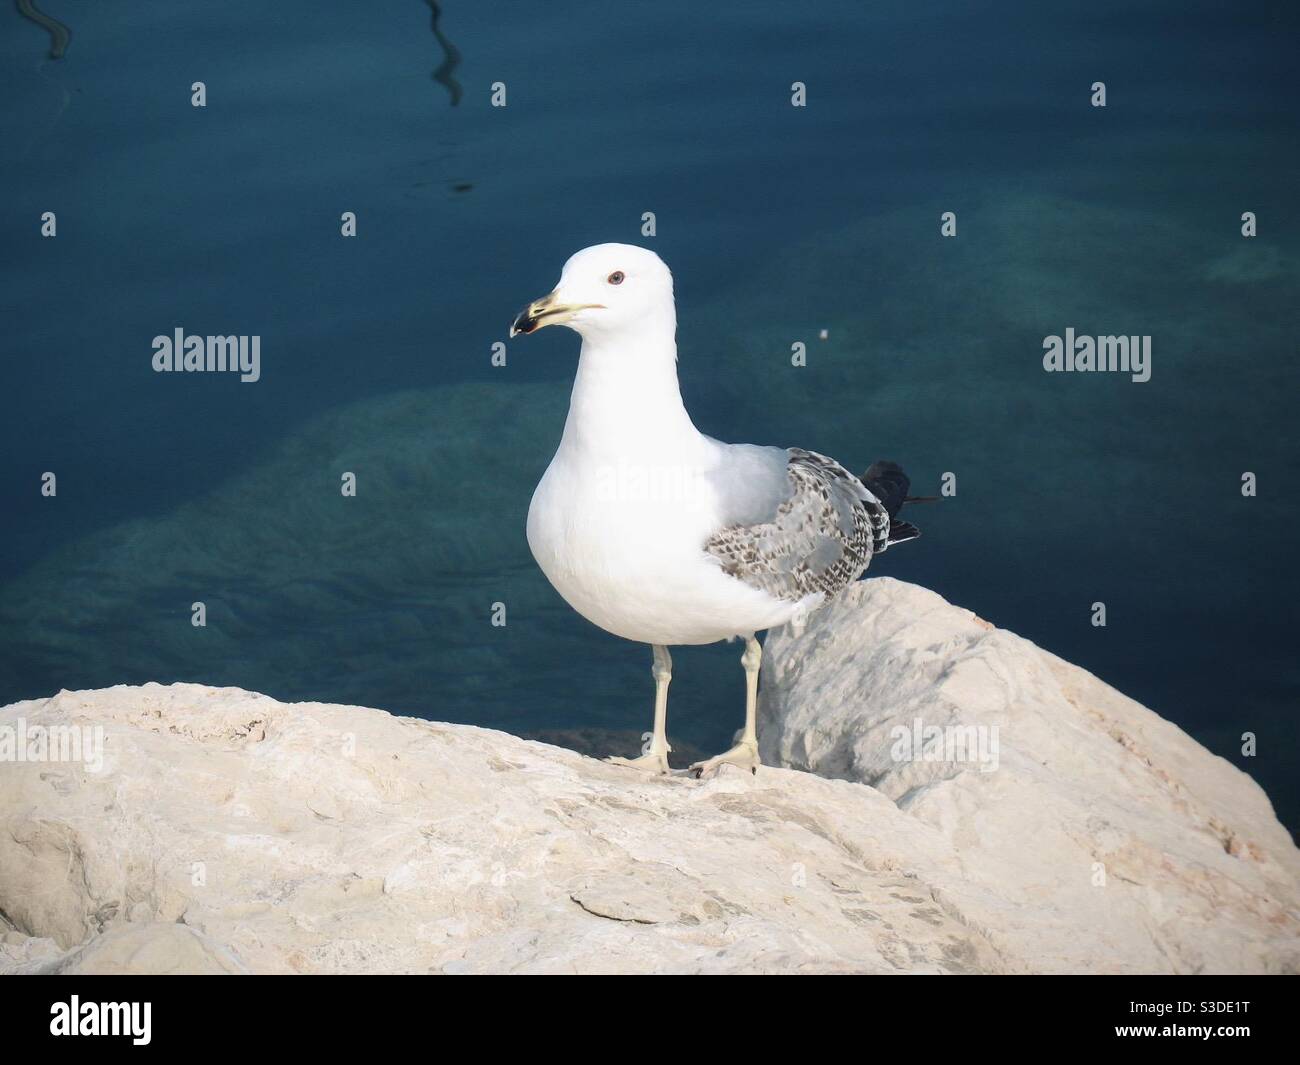 Seagull standing on a rock at the water’s edge Stock Photo